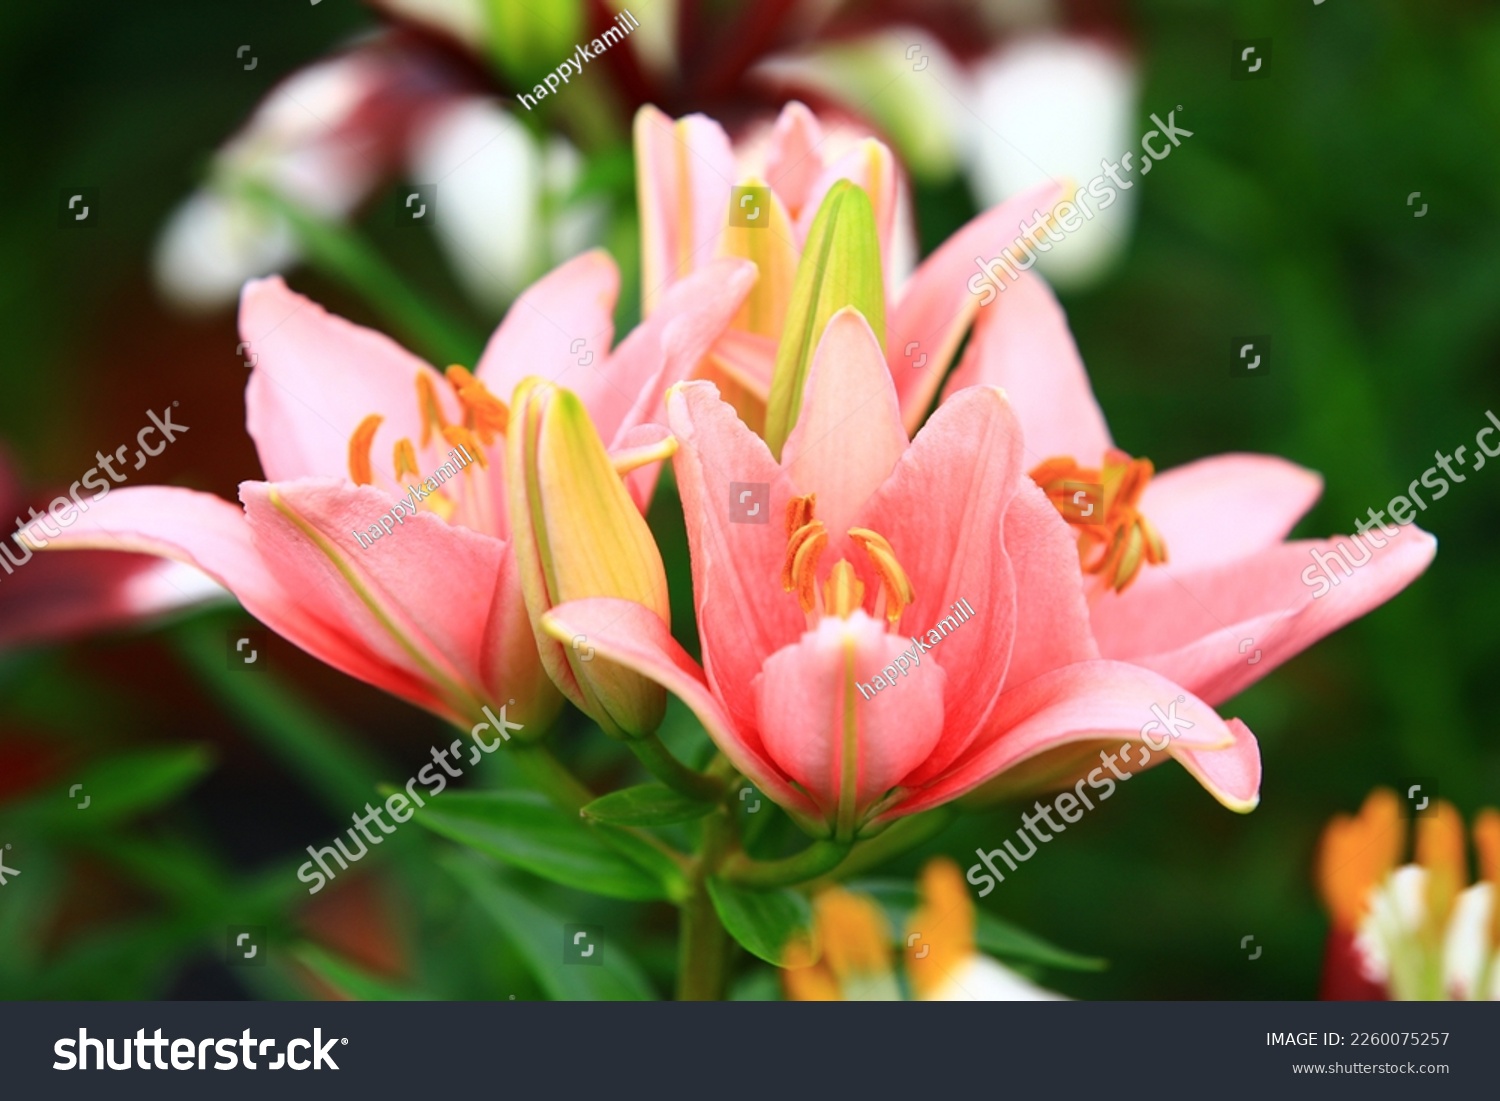 blooming colorful Oriental Lily(Fragrant Lily) flowers,close-up of pink lily flowers blooming in the garden  
 #2260075257